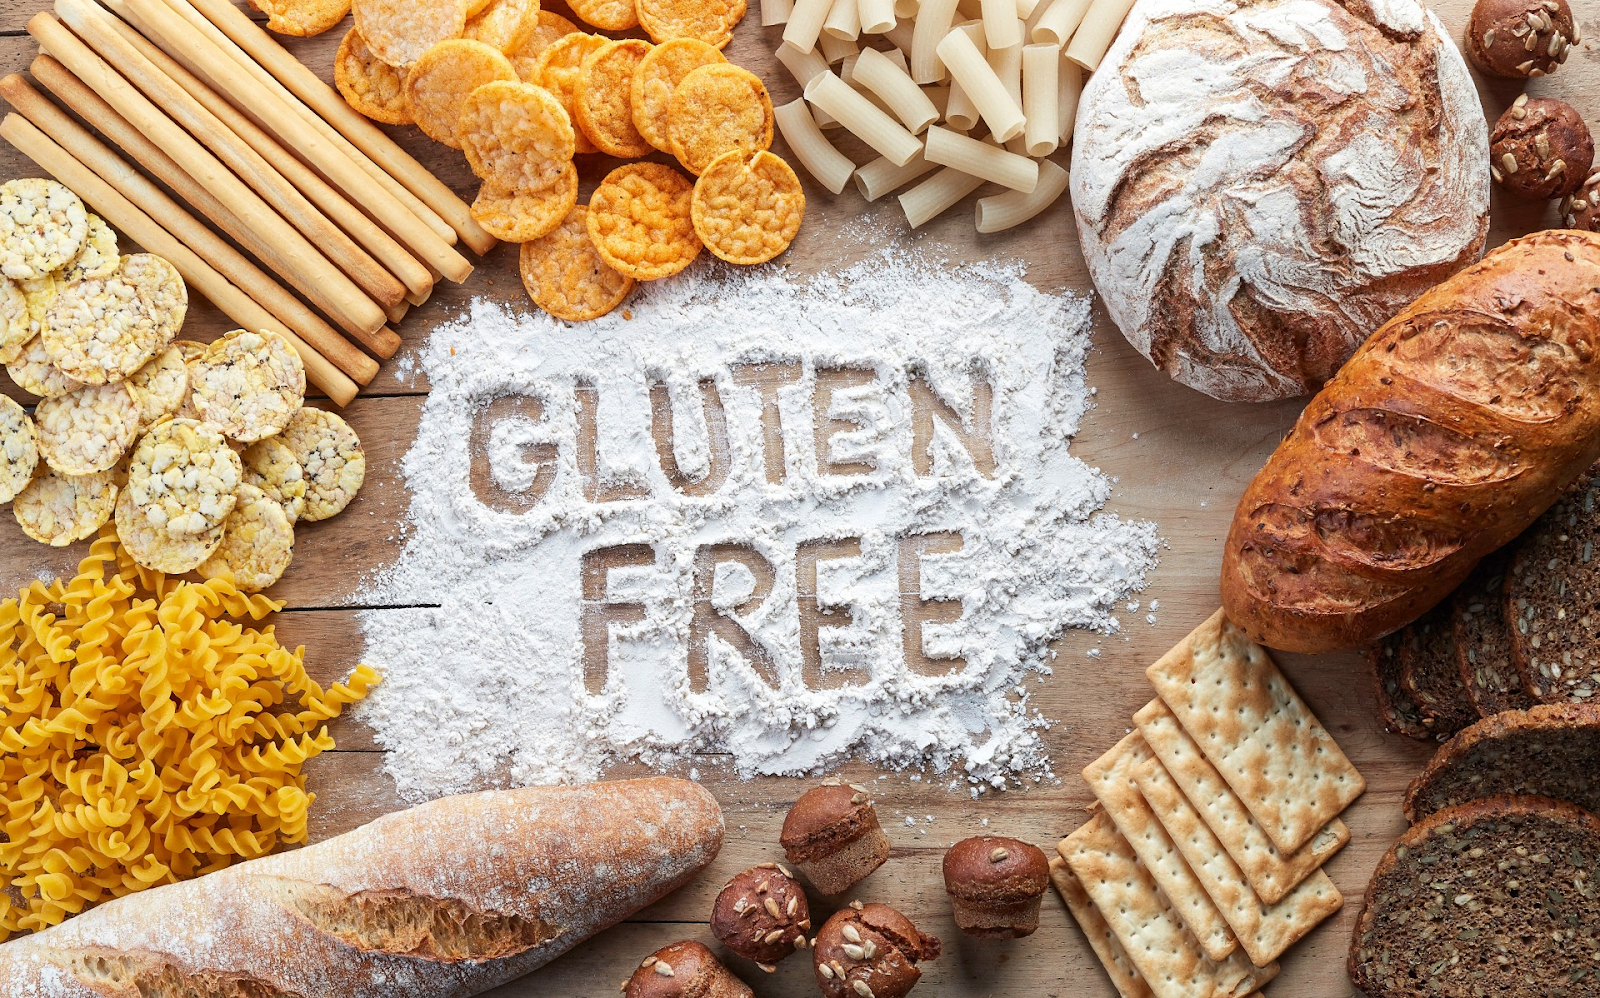 The word gluten free is written in flour on a wooden table surrounded by different types of food.